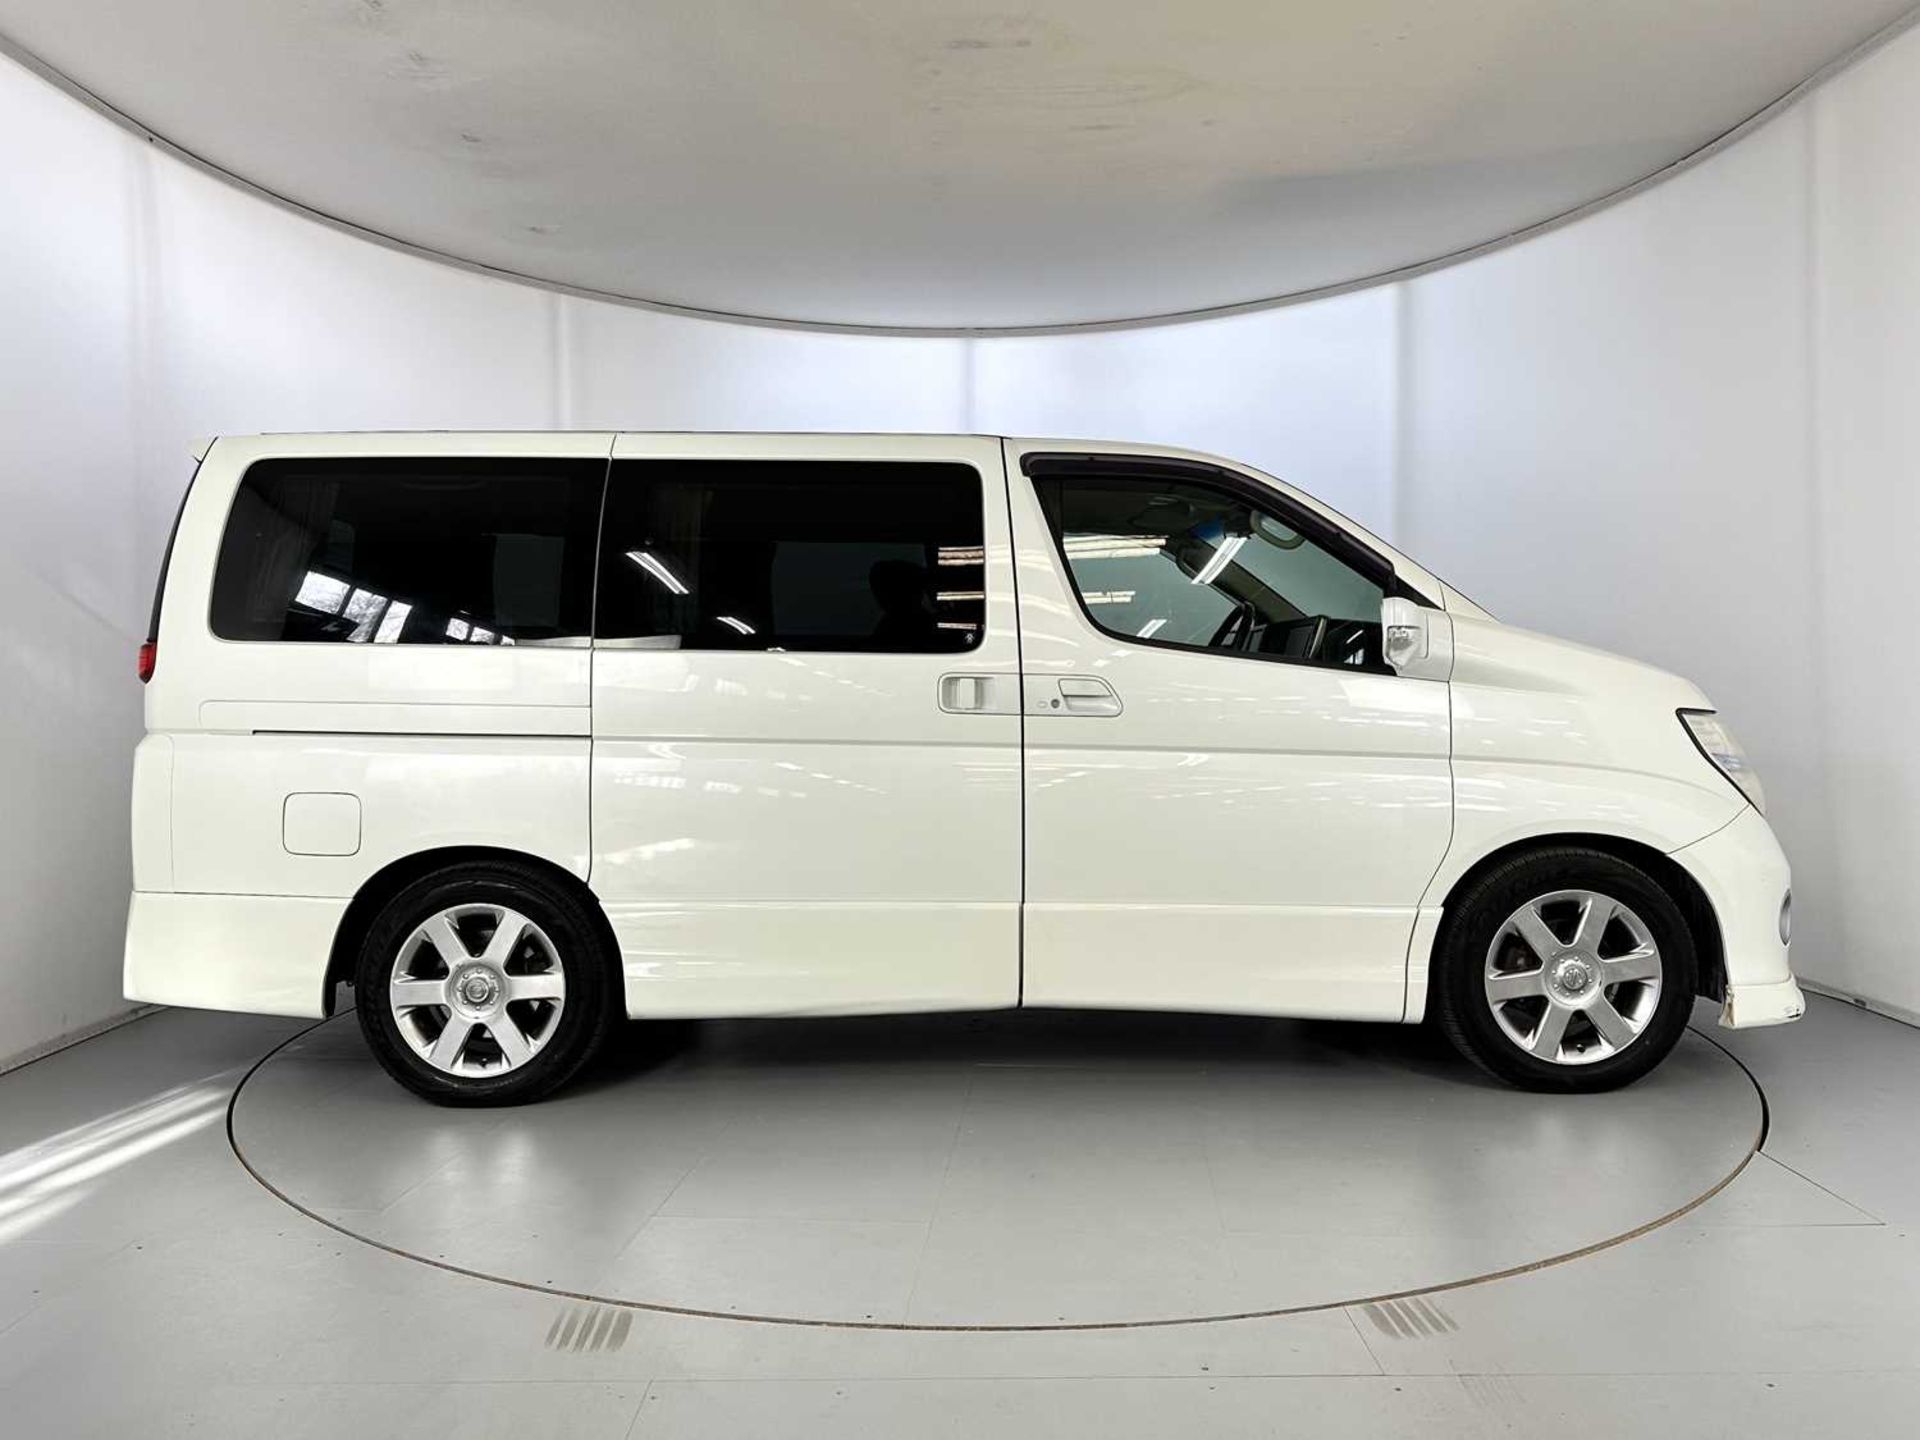 2007 Nissan Elgrand - Highway Star Edition 4WD - Image 11 of 39